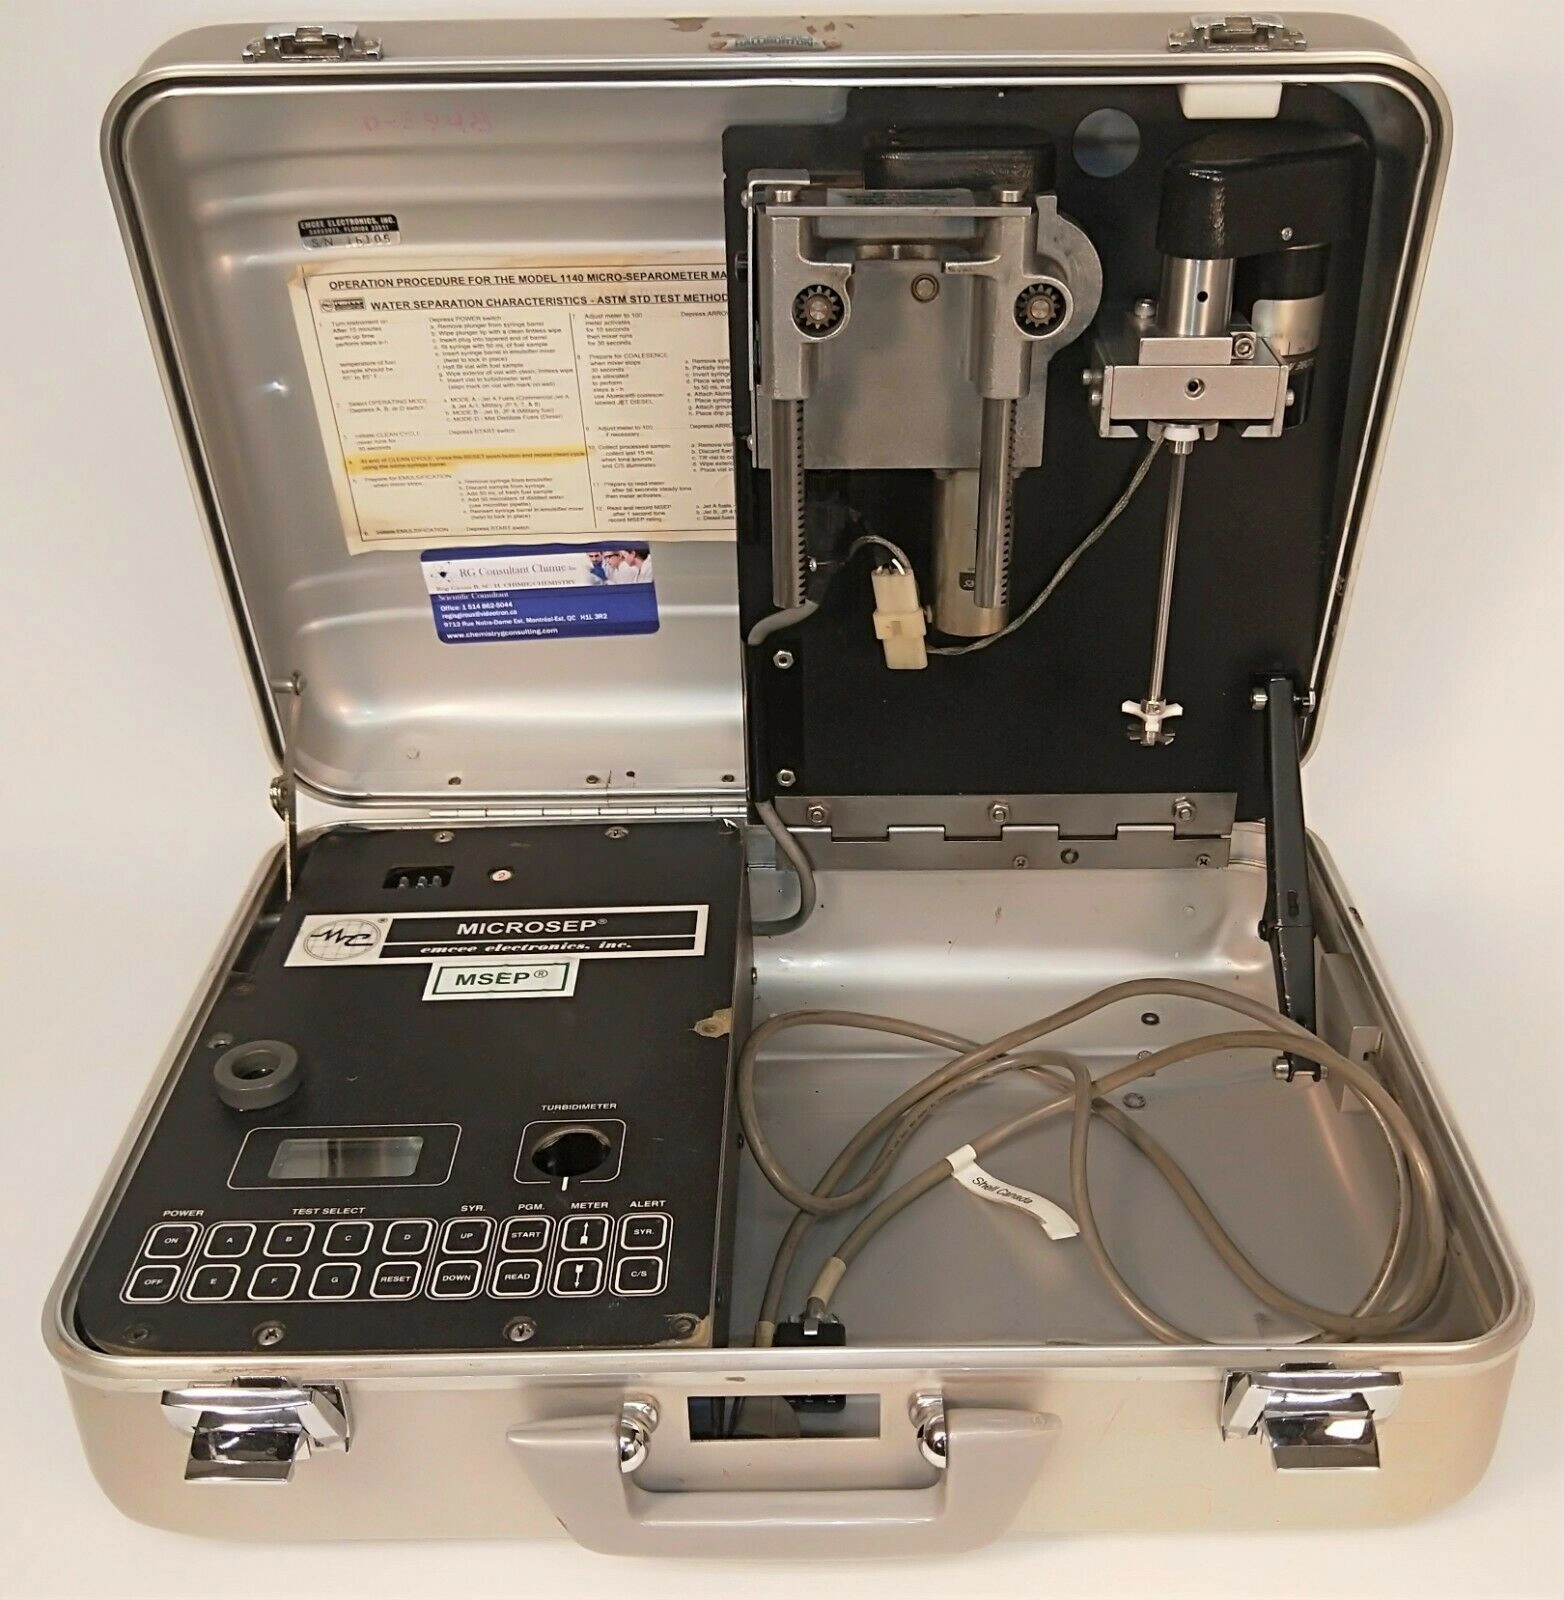 Emcee 1140 MicroSep Mark V Deluxe Water Characteristic Tester - REDUCED PRICE!!